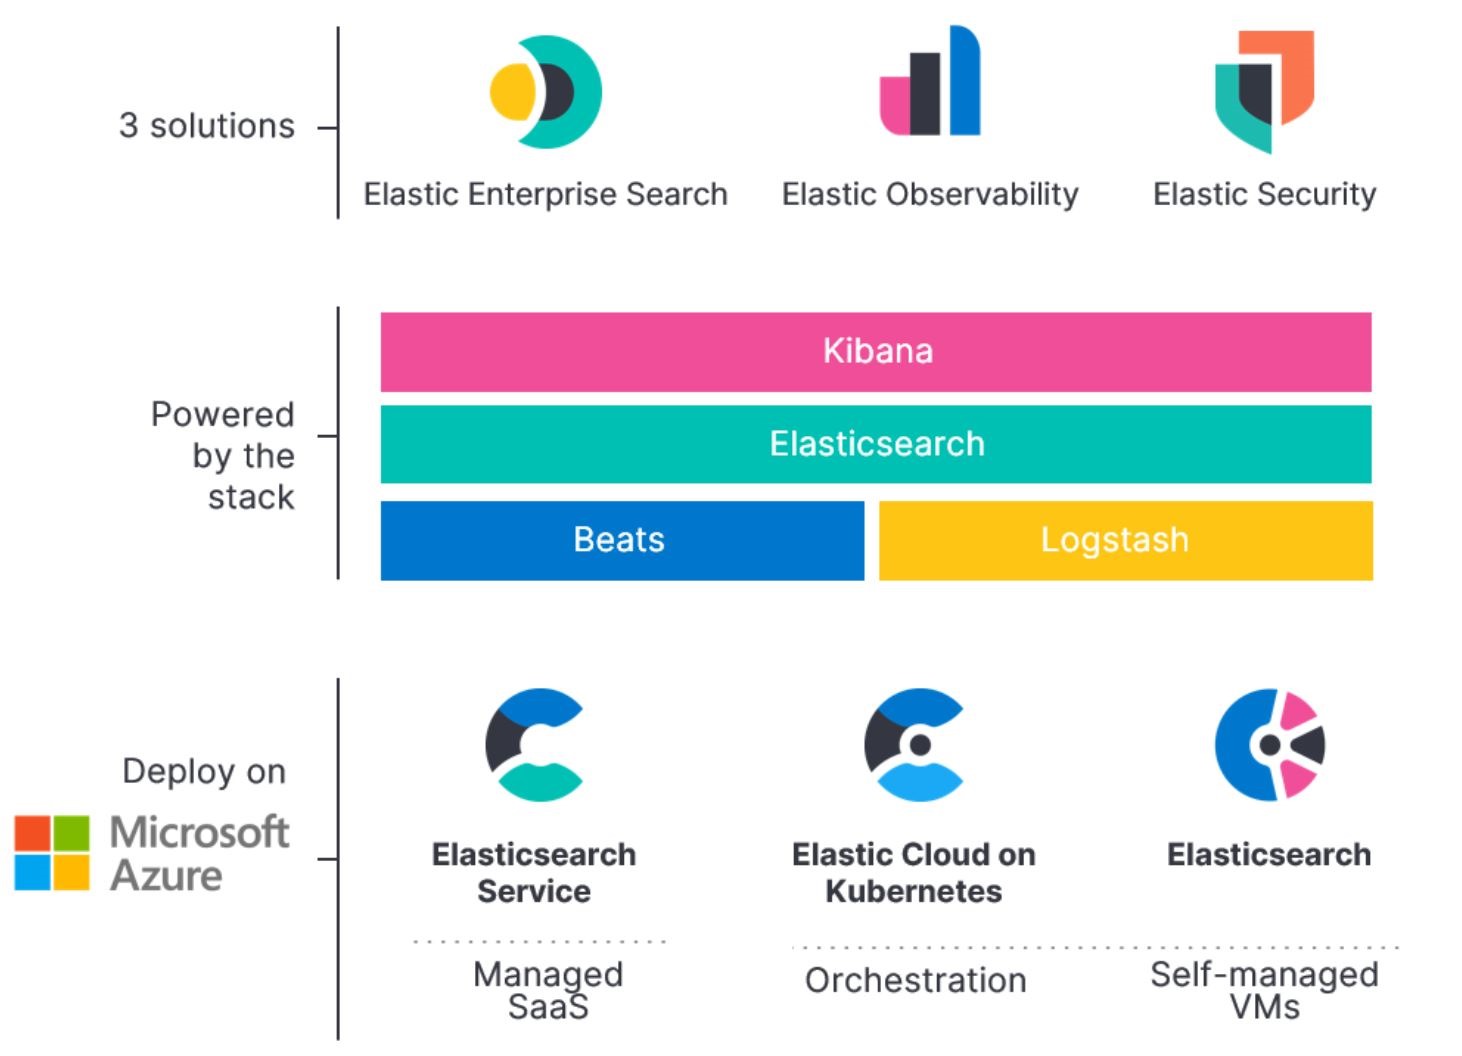 Manufacturing, Healthcare, Financial service industry and online ecommerce industries are all using Elastic on Azure to fulfill their search and observability needs.